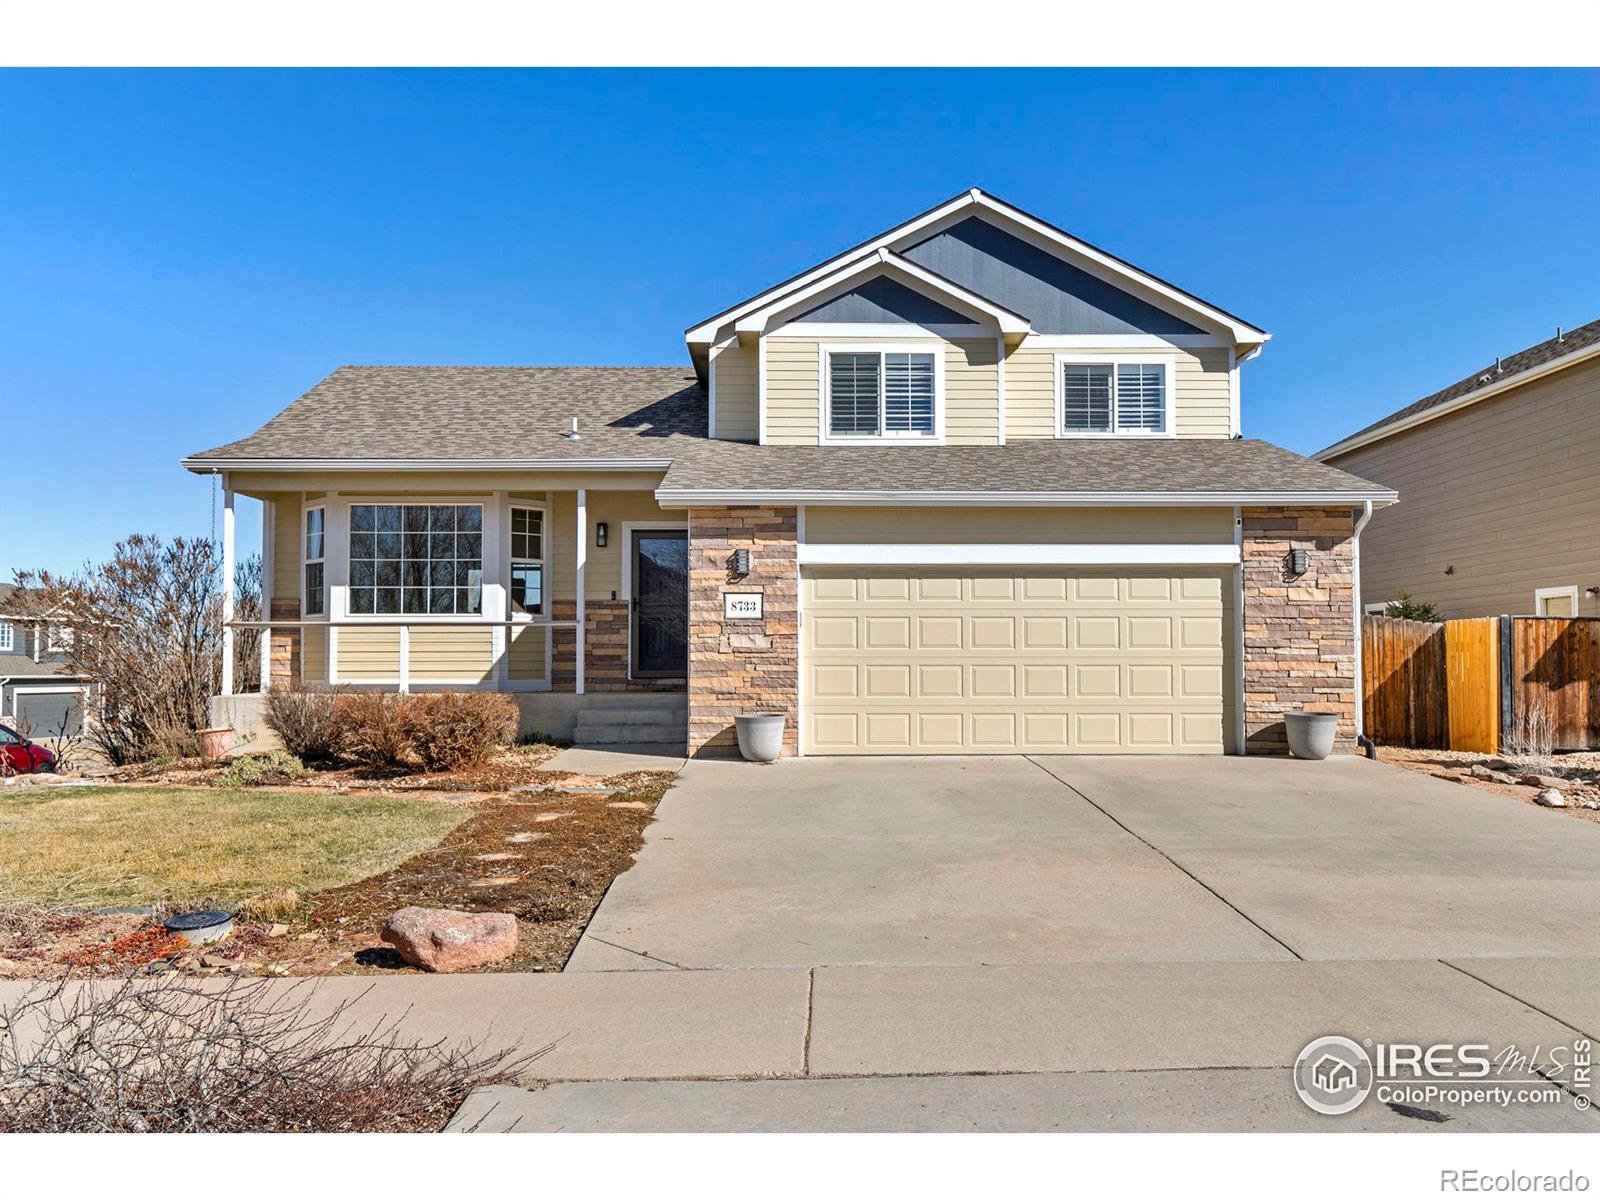 8733  19th St Rd, greeley MLS: 4567891005336 Beds: 3 Baths: 3 Price: $425,000